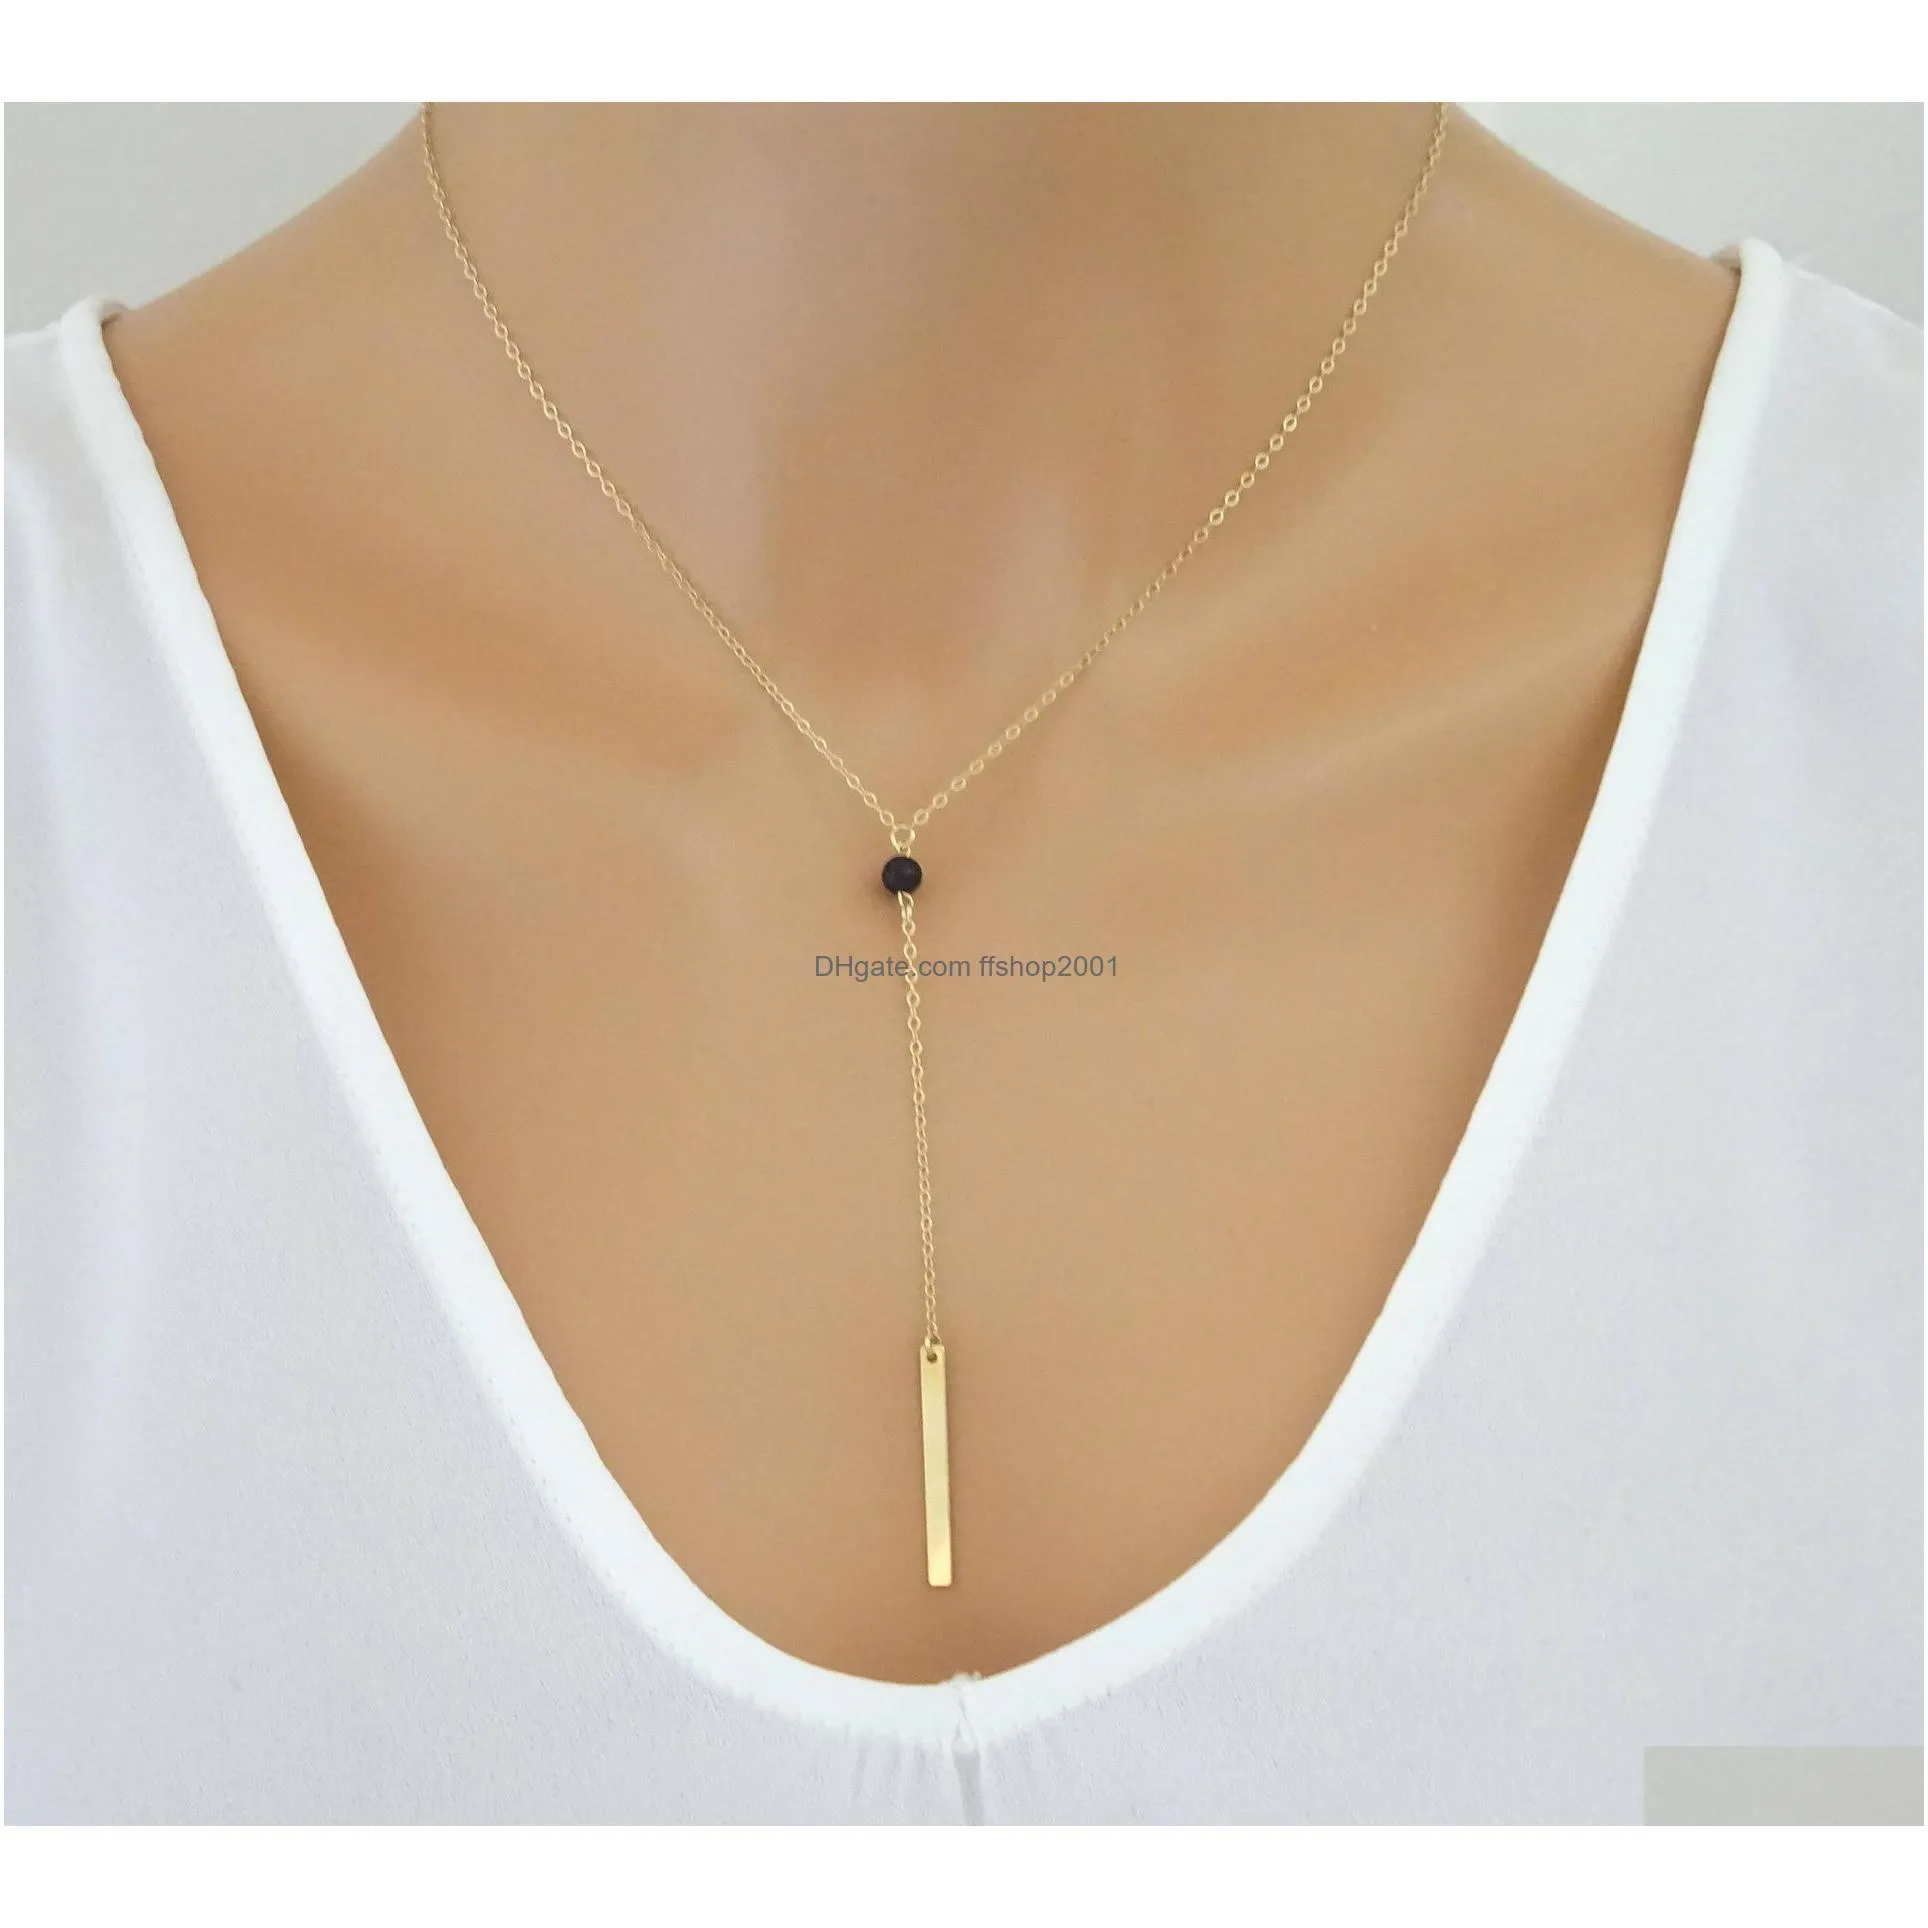 mixed styles silver gold plated lava stone necklace aromatherapy essential oil diffuser necklace for women jewelry